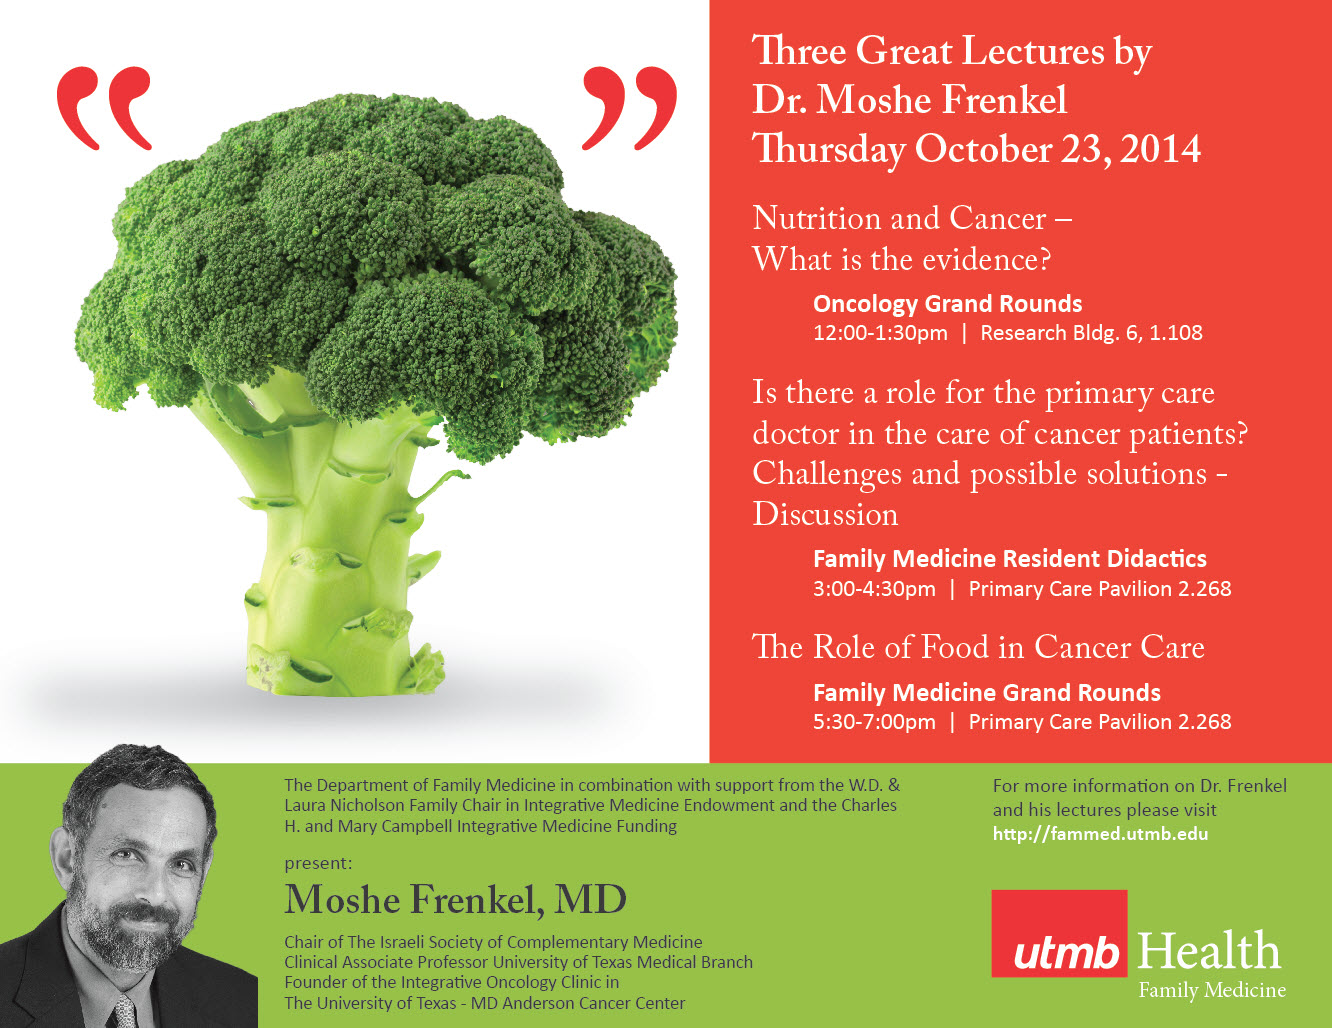 Announcement of grand rounds lecture given by Moshe Frenkel, MD